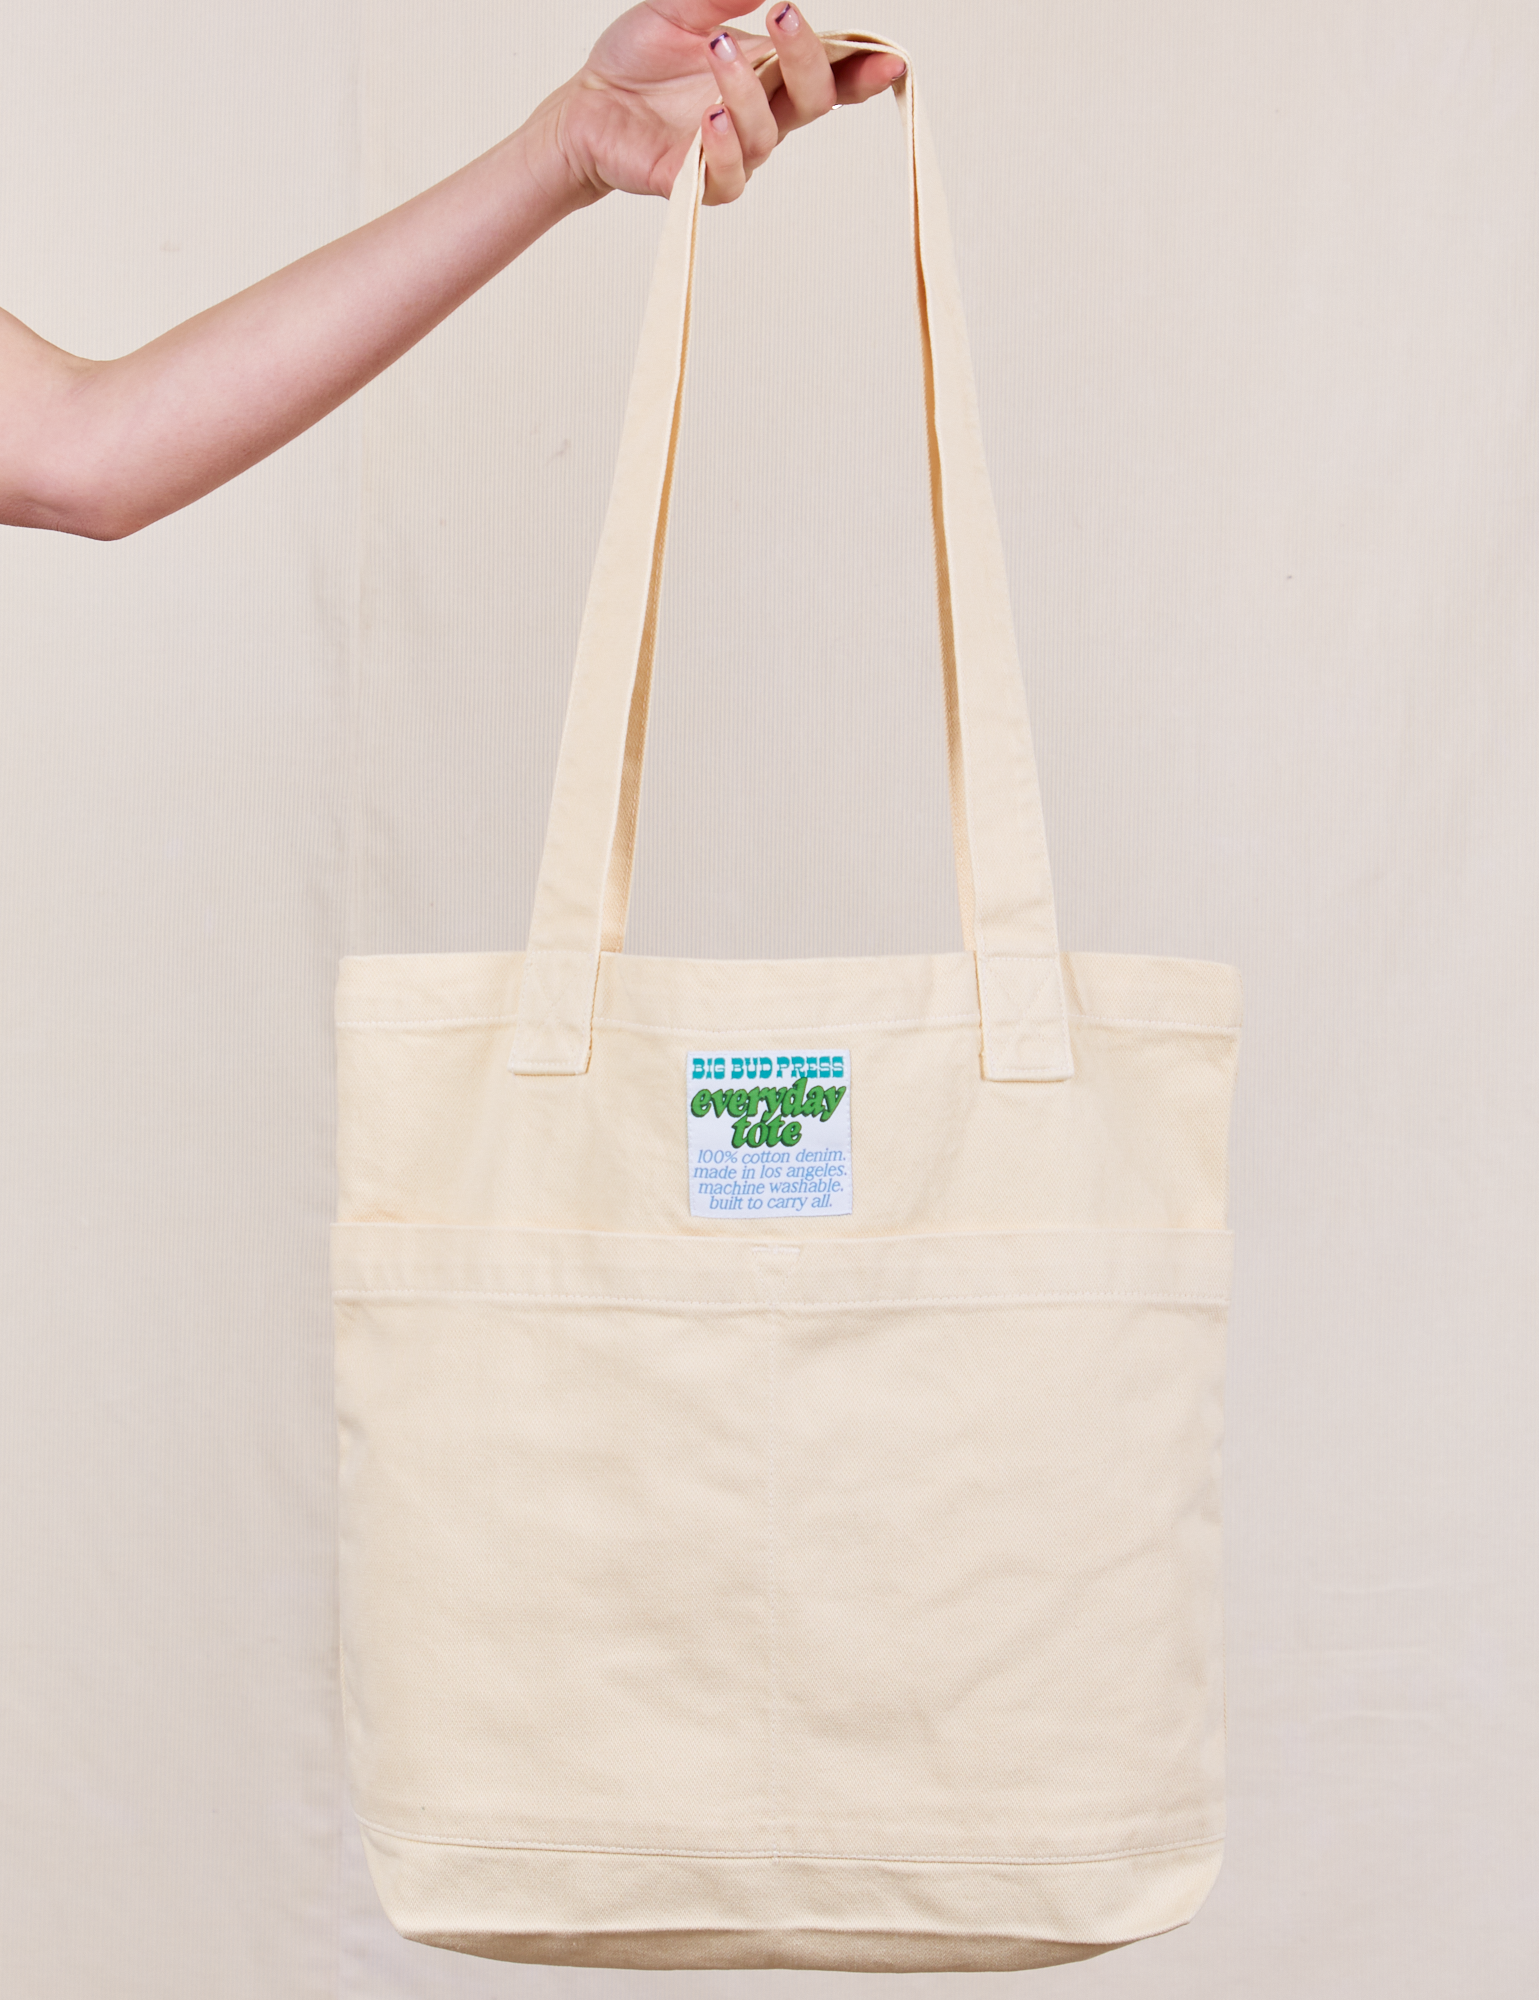 Everyday Tote Bag in Vintage Off-White